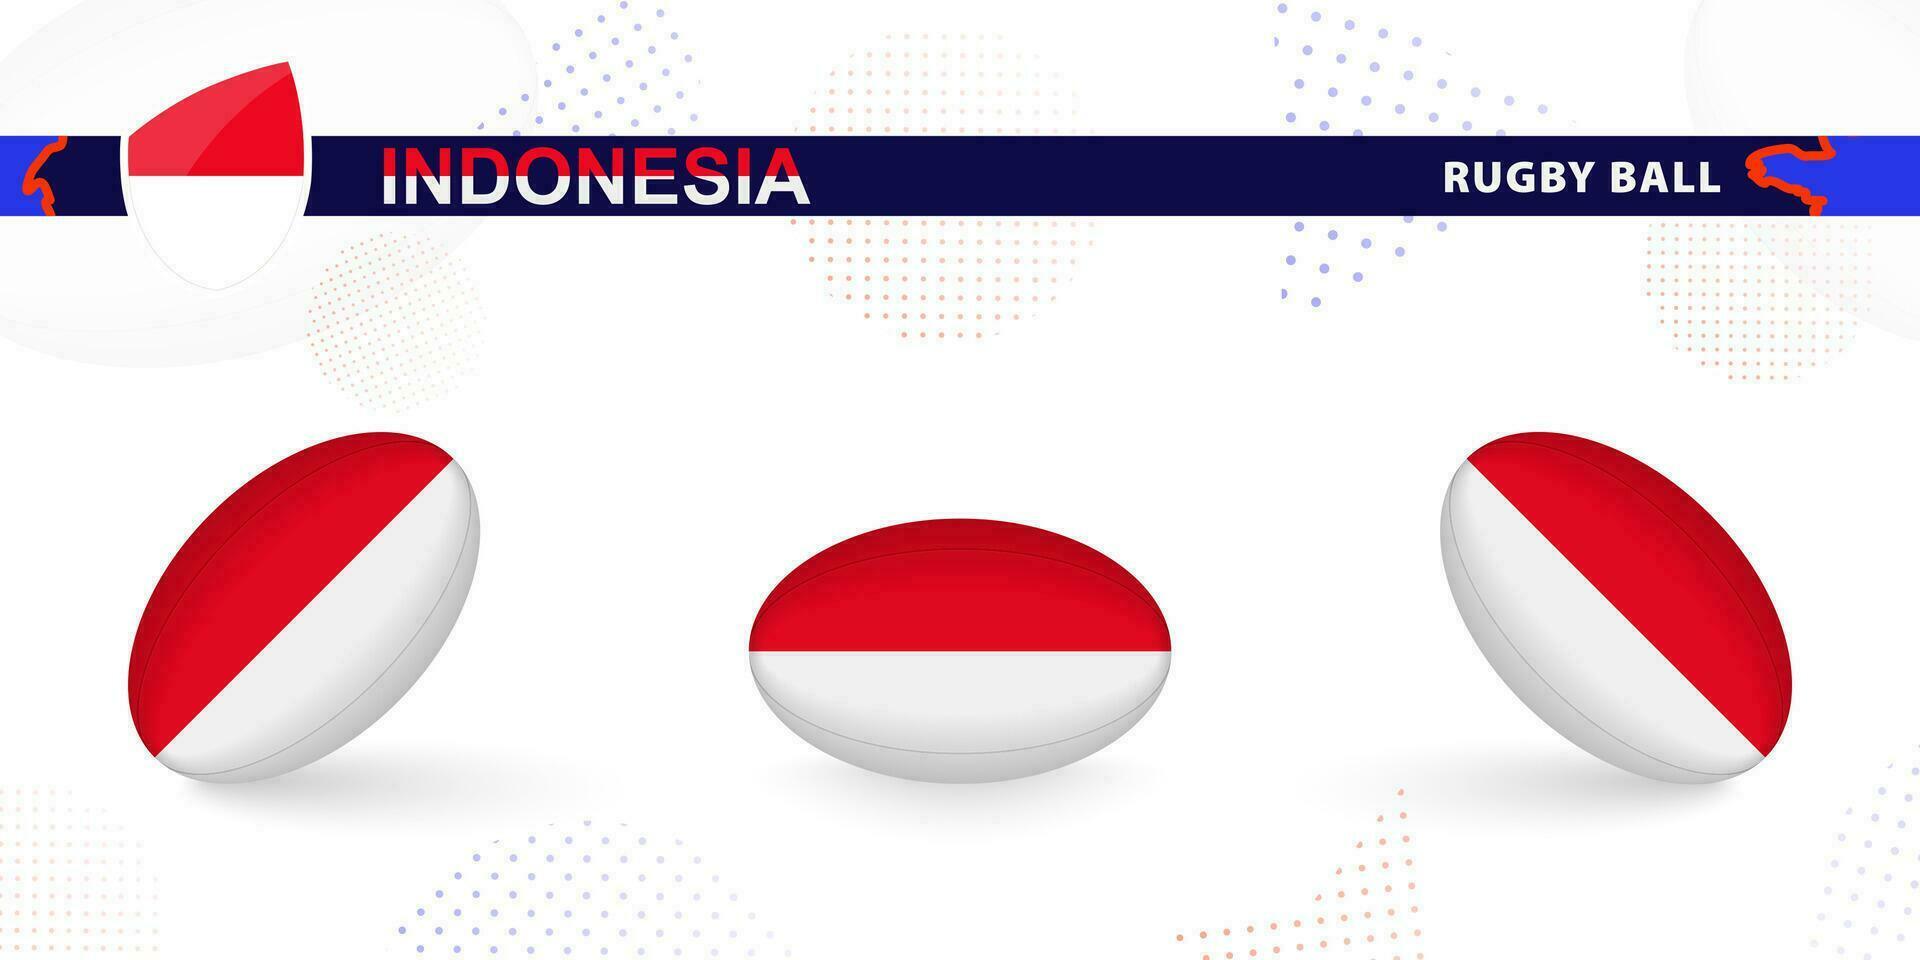 Rugby ball set with the flag of Indonesia in various angles on abstract background. vector